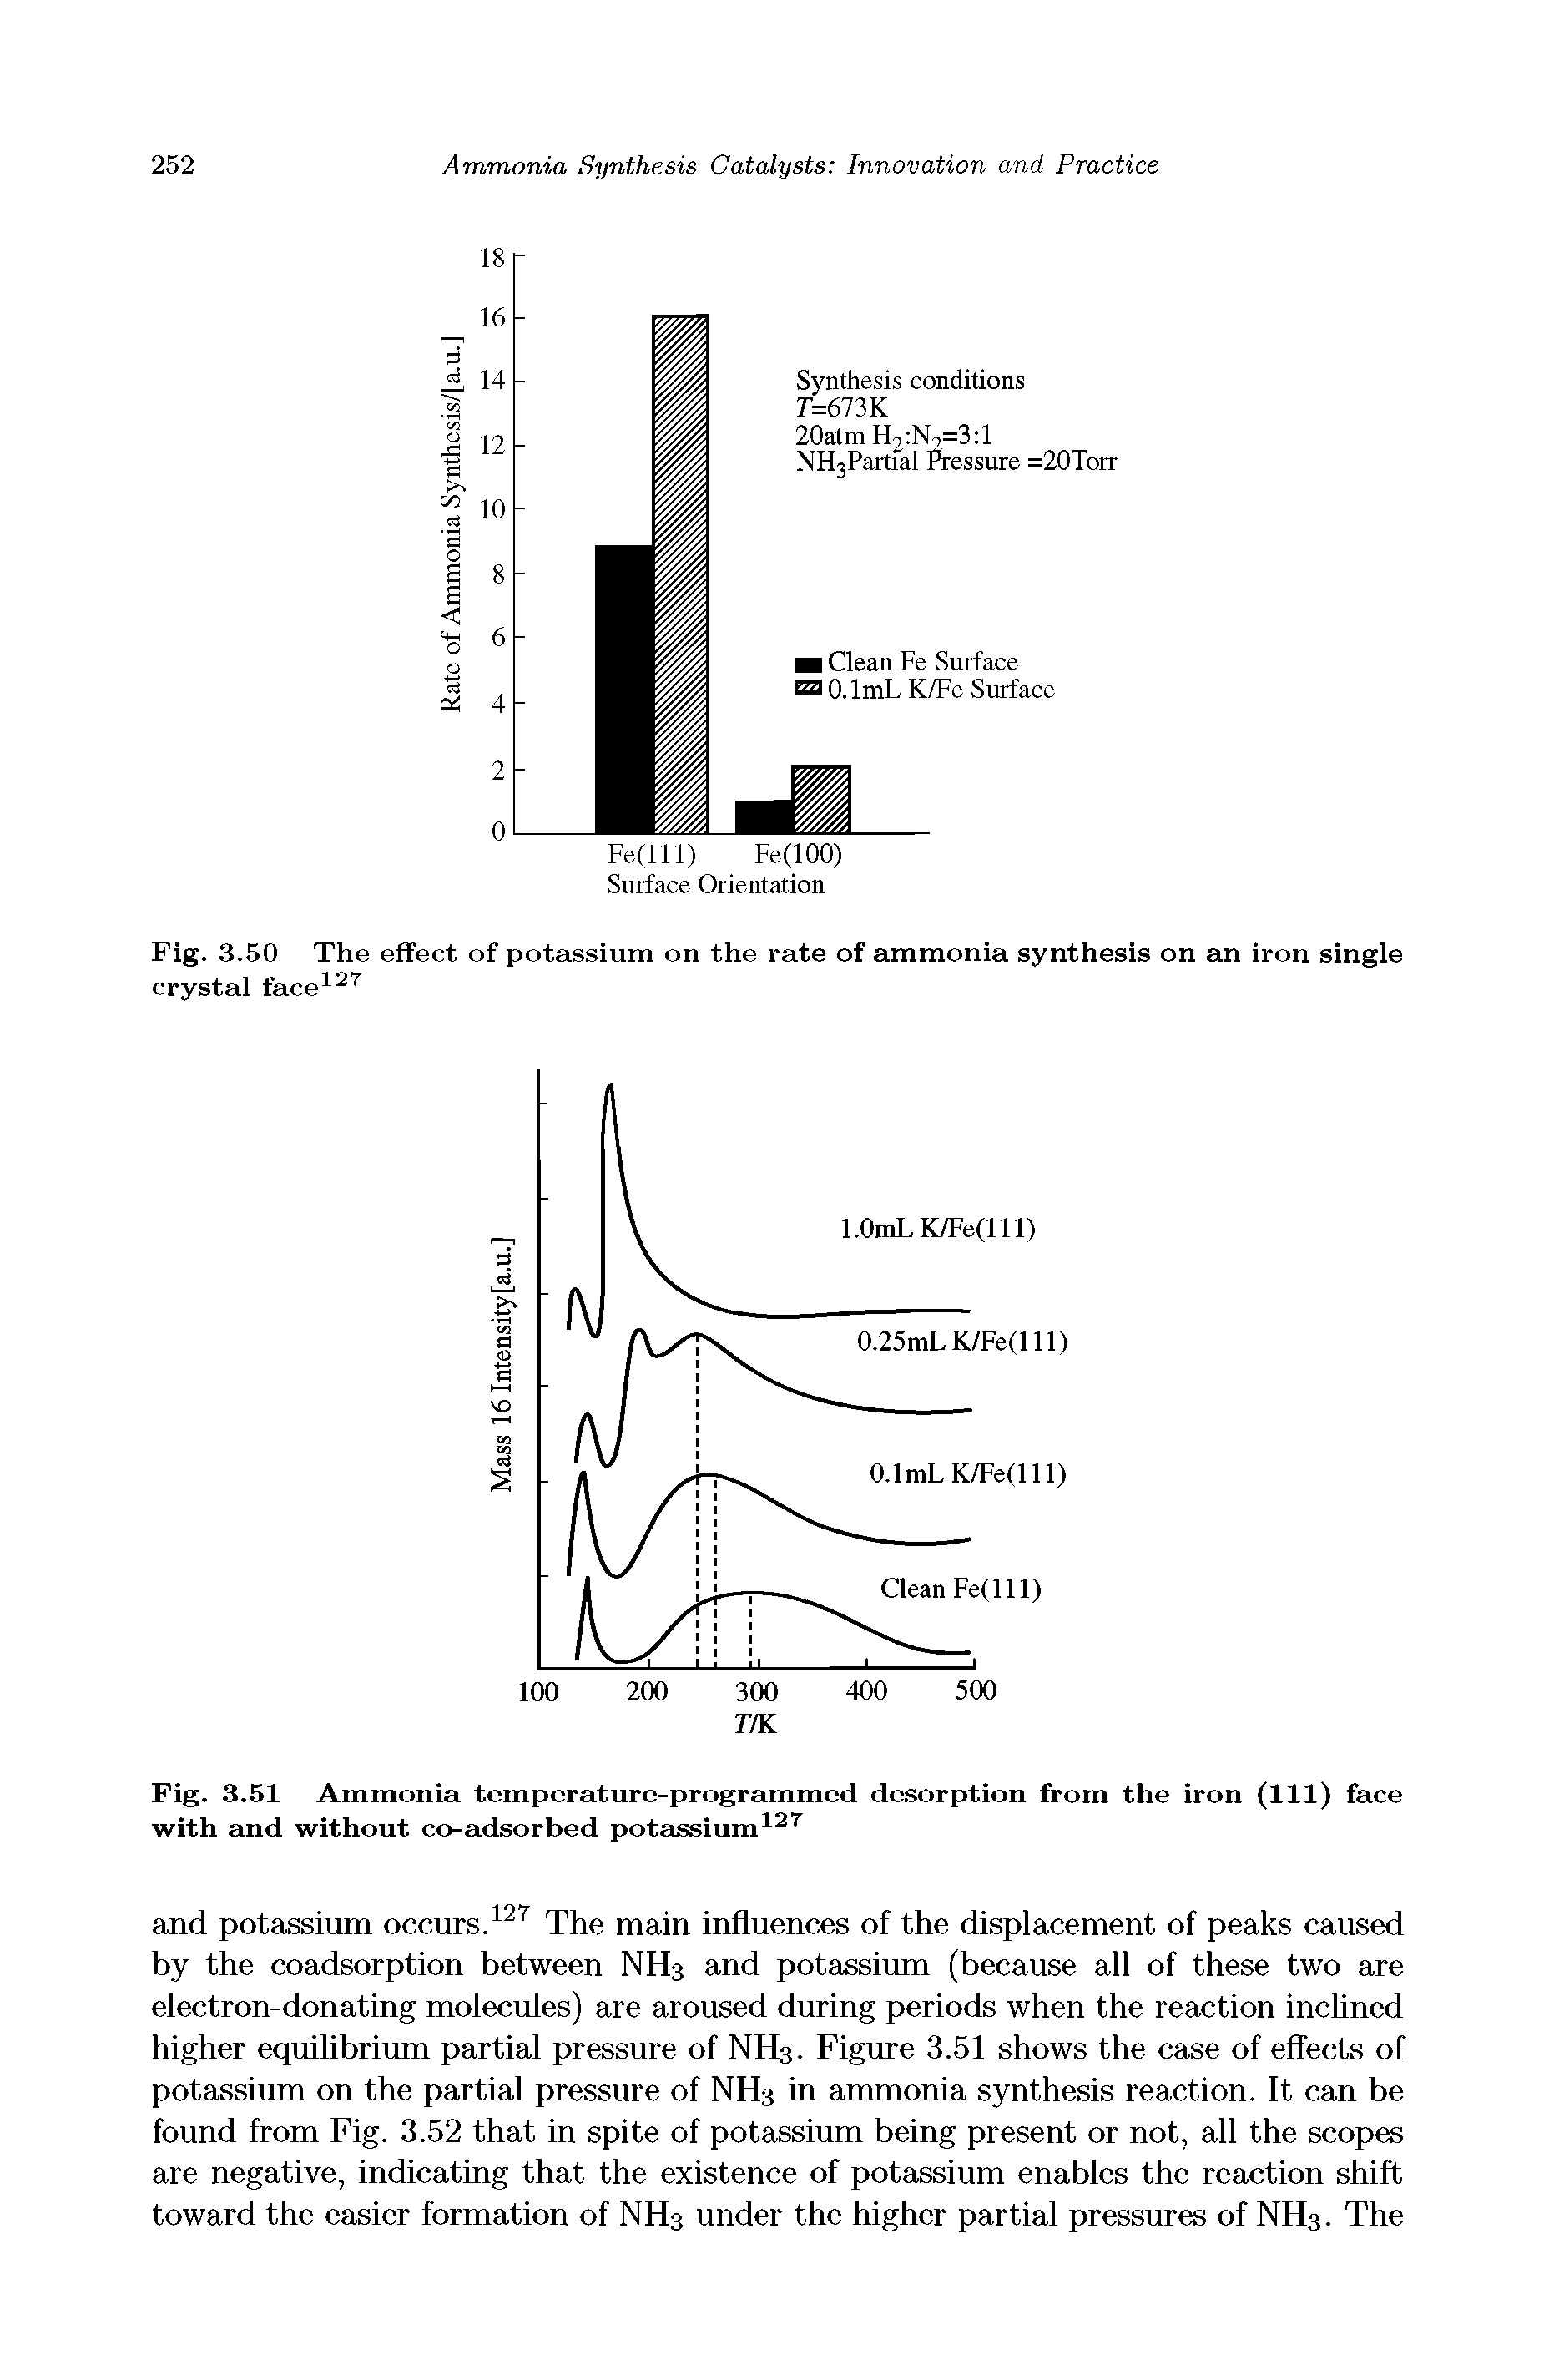 Fig. 3.50 The effect of potassium on the rate of ammonia synthesis on an iron single crystal face ...